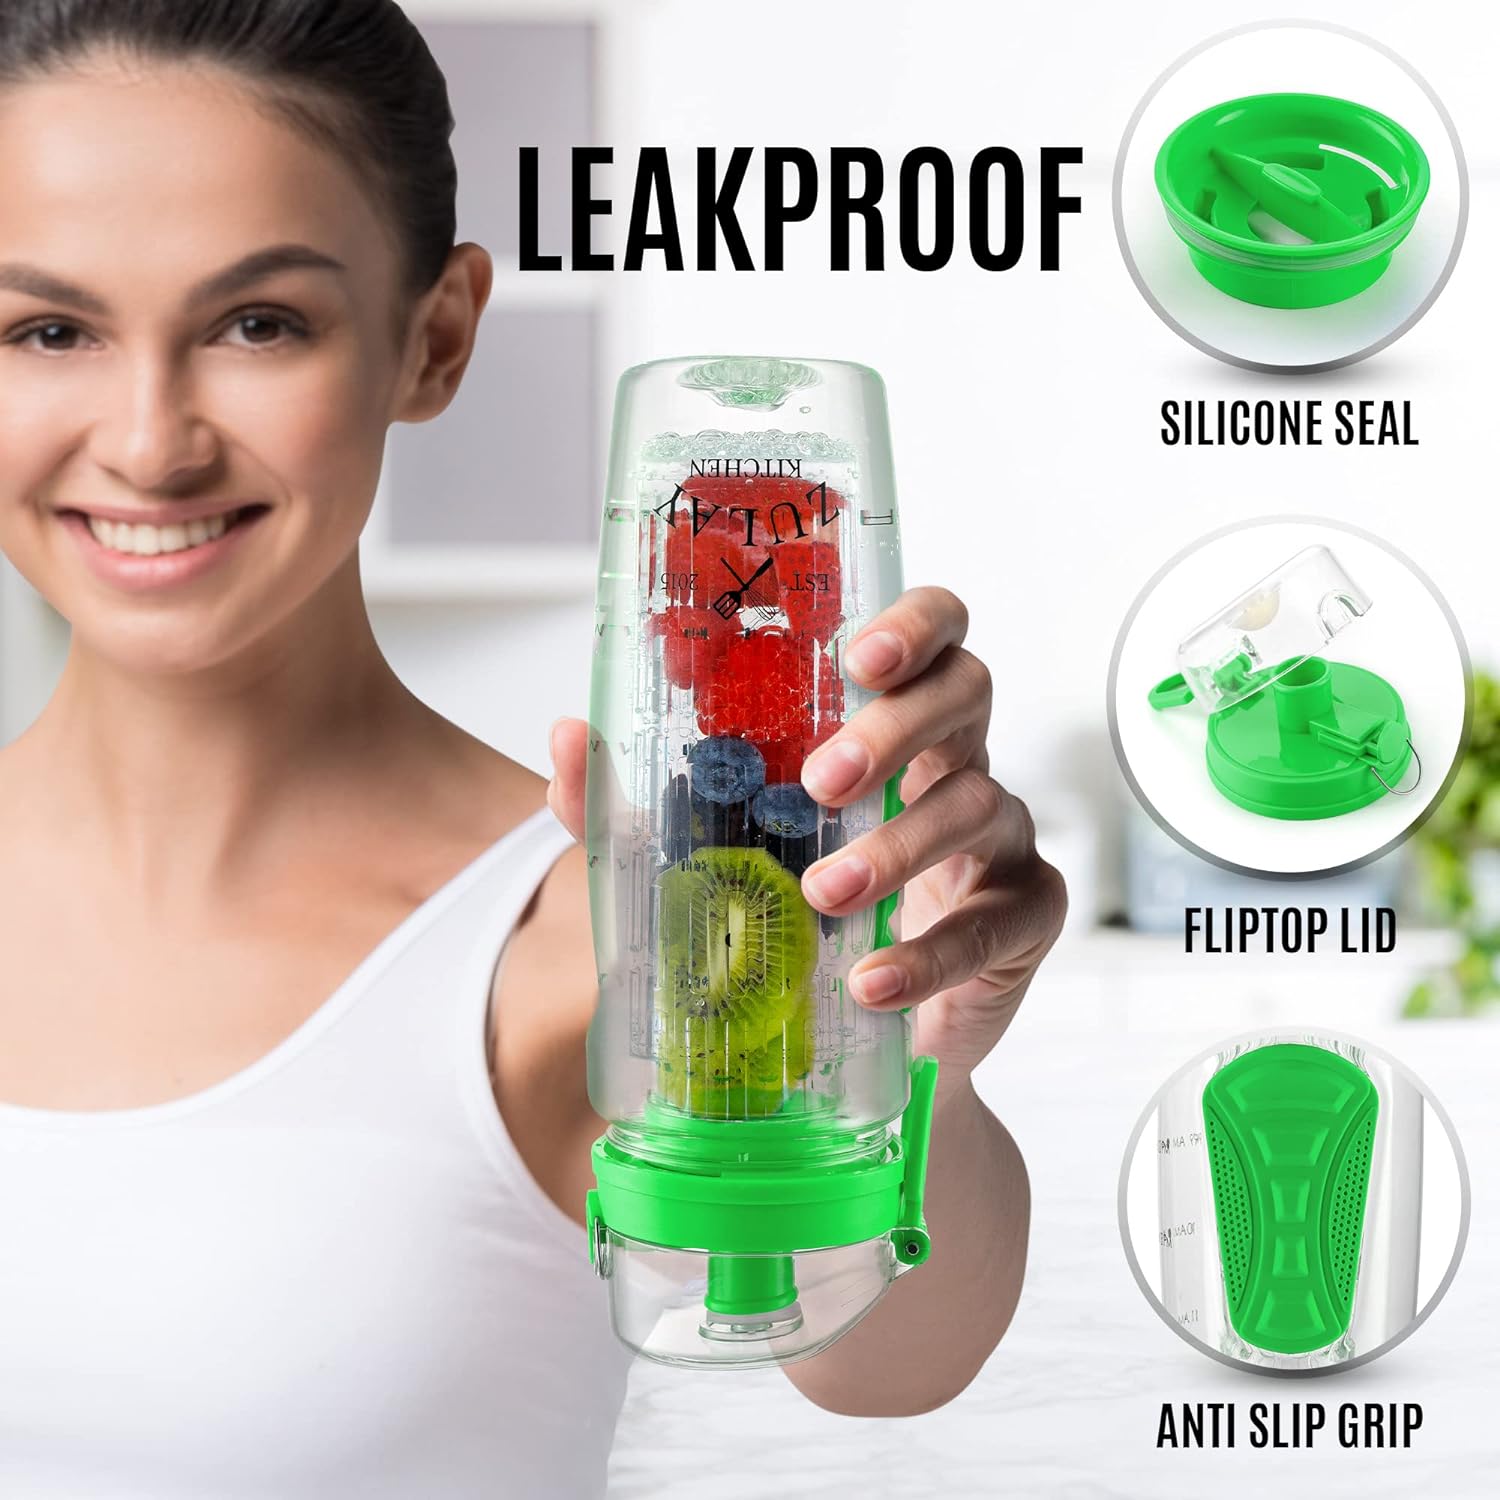 Zulay Kitchen Portable Water Bottle with Fruit Infuser - Green